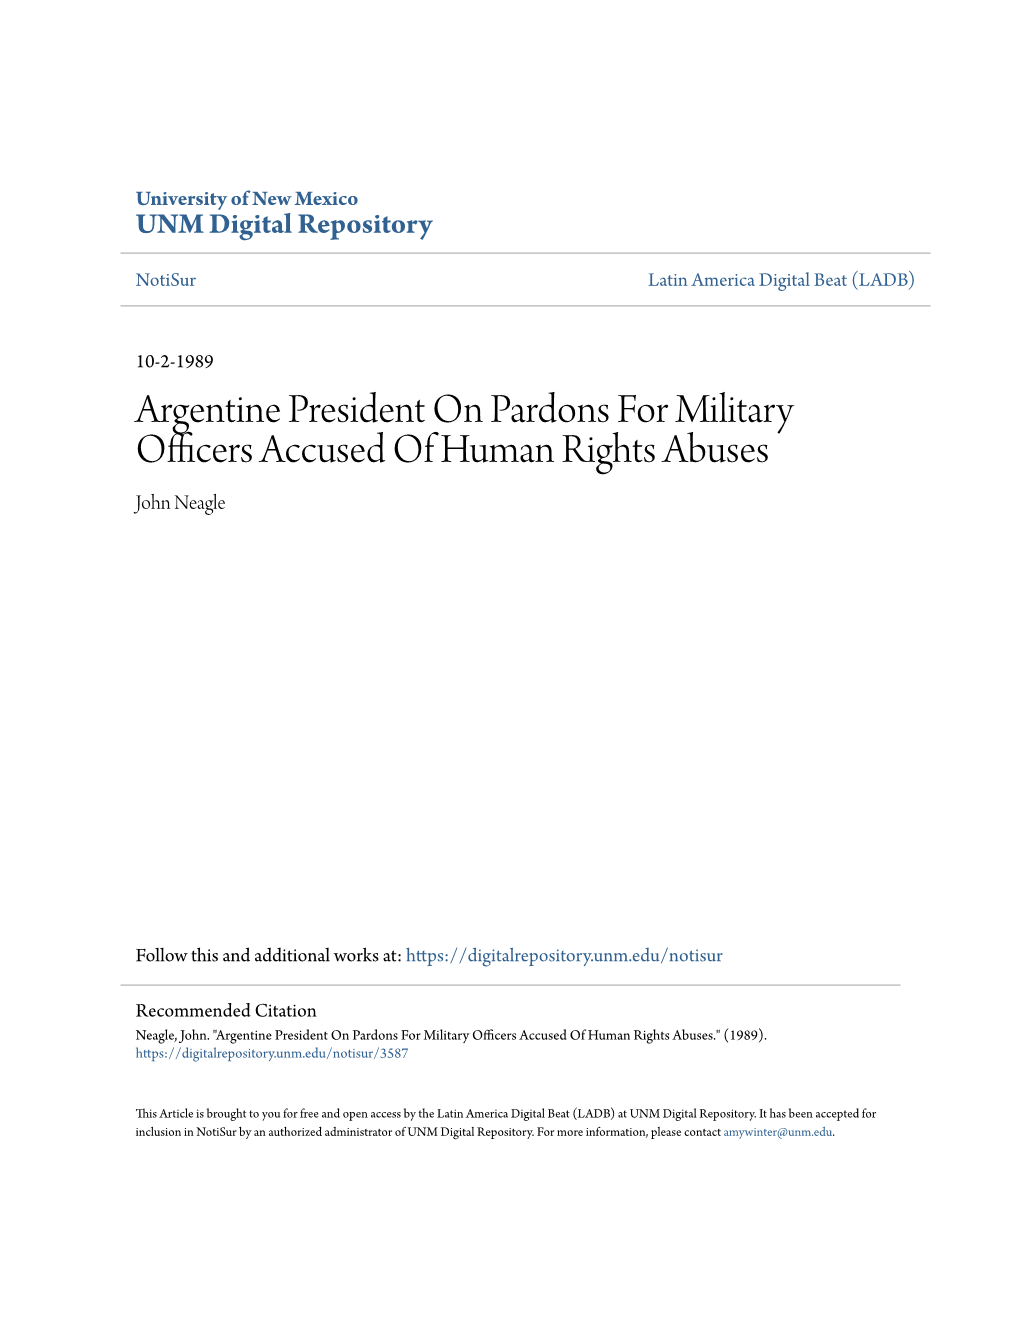 Argentine President on Pardons for Military Officers Accused of Human Rights Abuses John Neagle